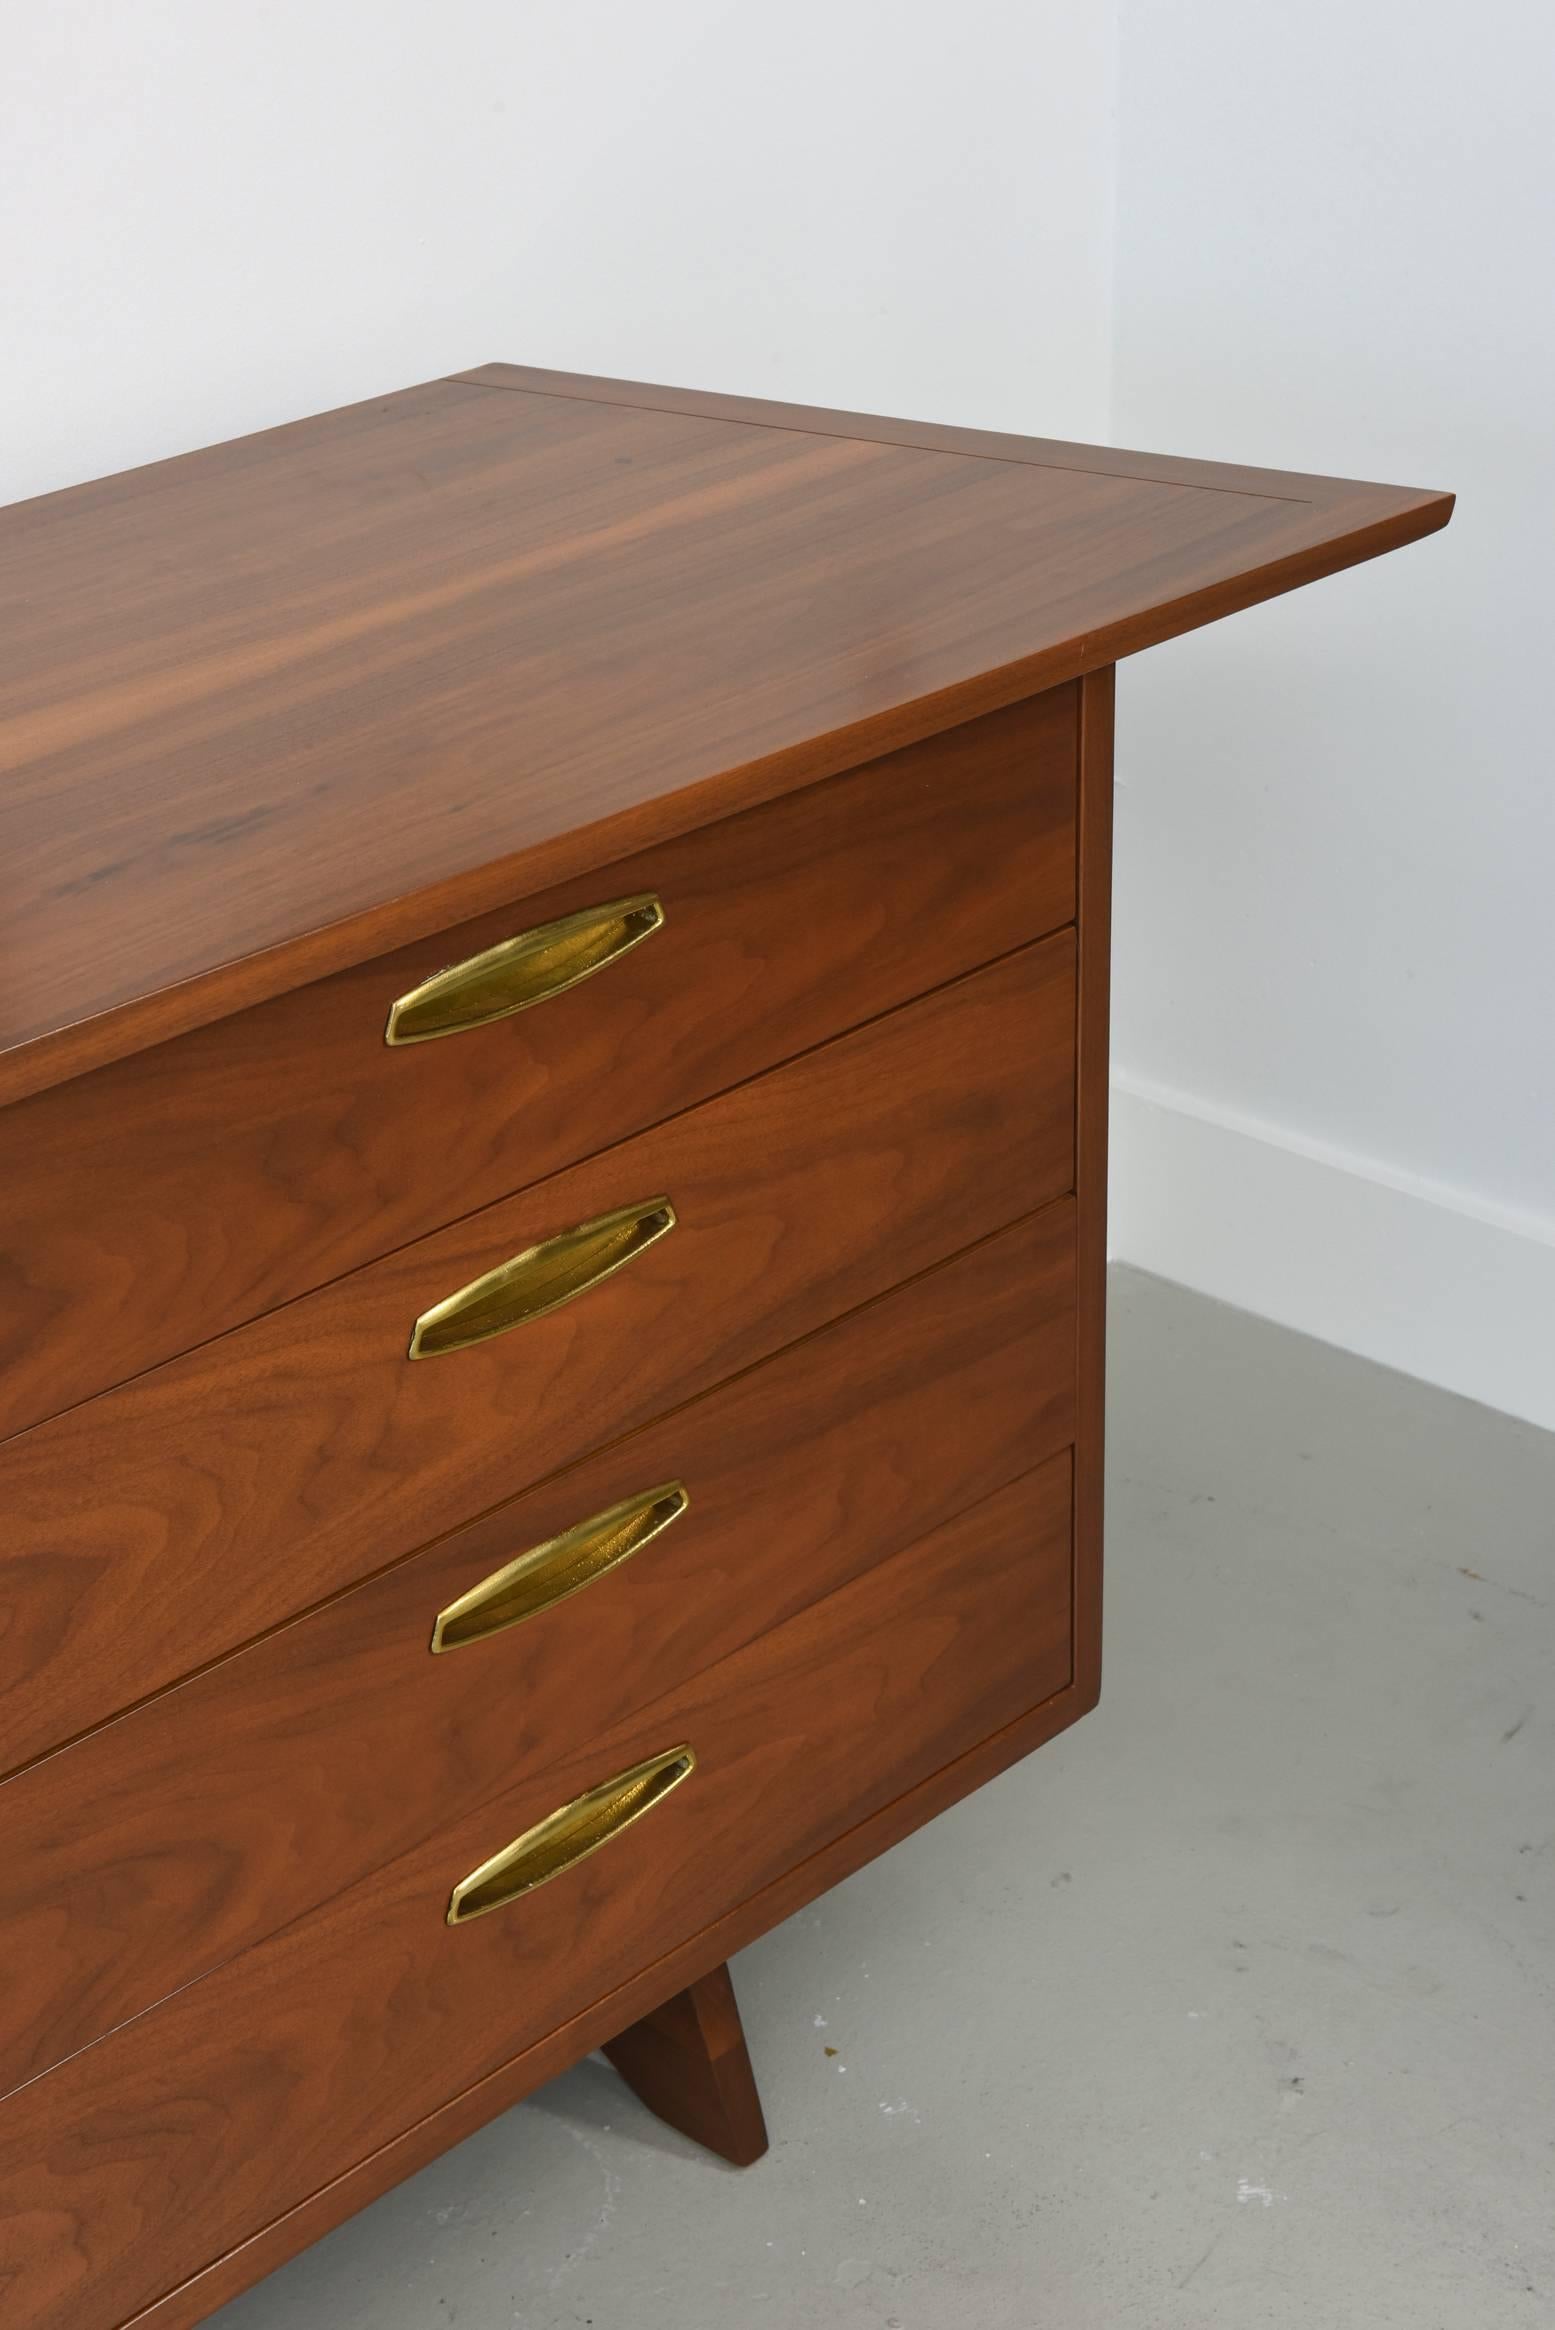 The overhanging irregular shape top above 12 drawers with brass pulls, on splayed legs
George Nakashima for Widdicomb.